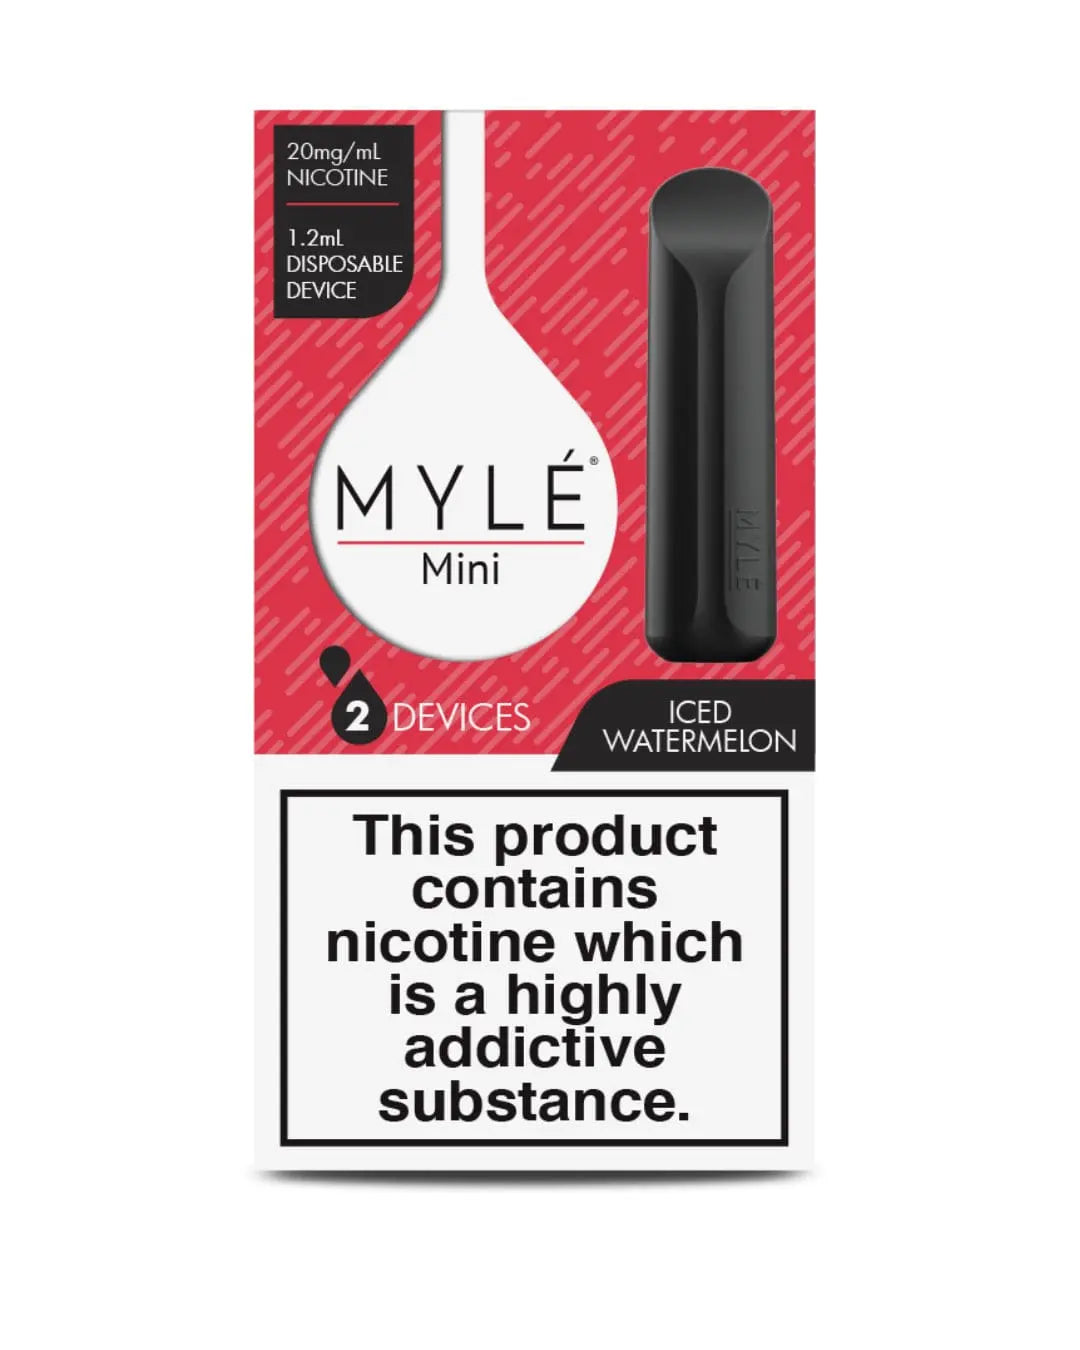 Iced Watermelon - Mini Myle - Pack of 2 Devices Disposable Vapes